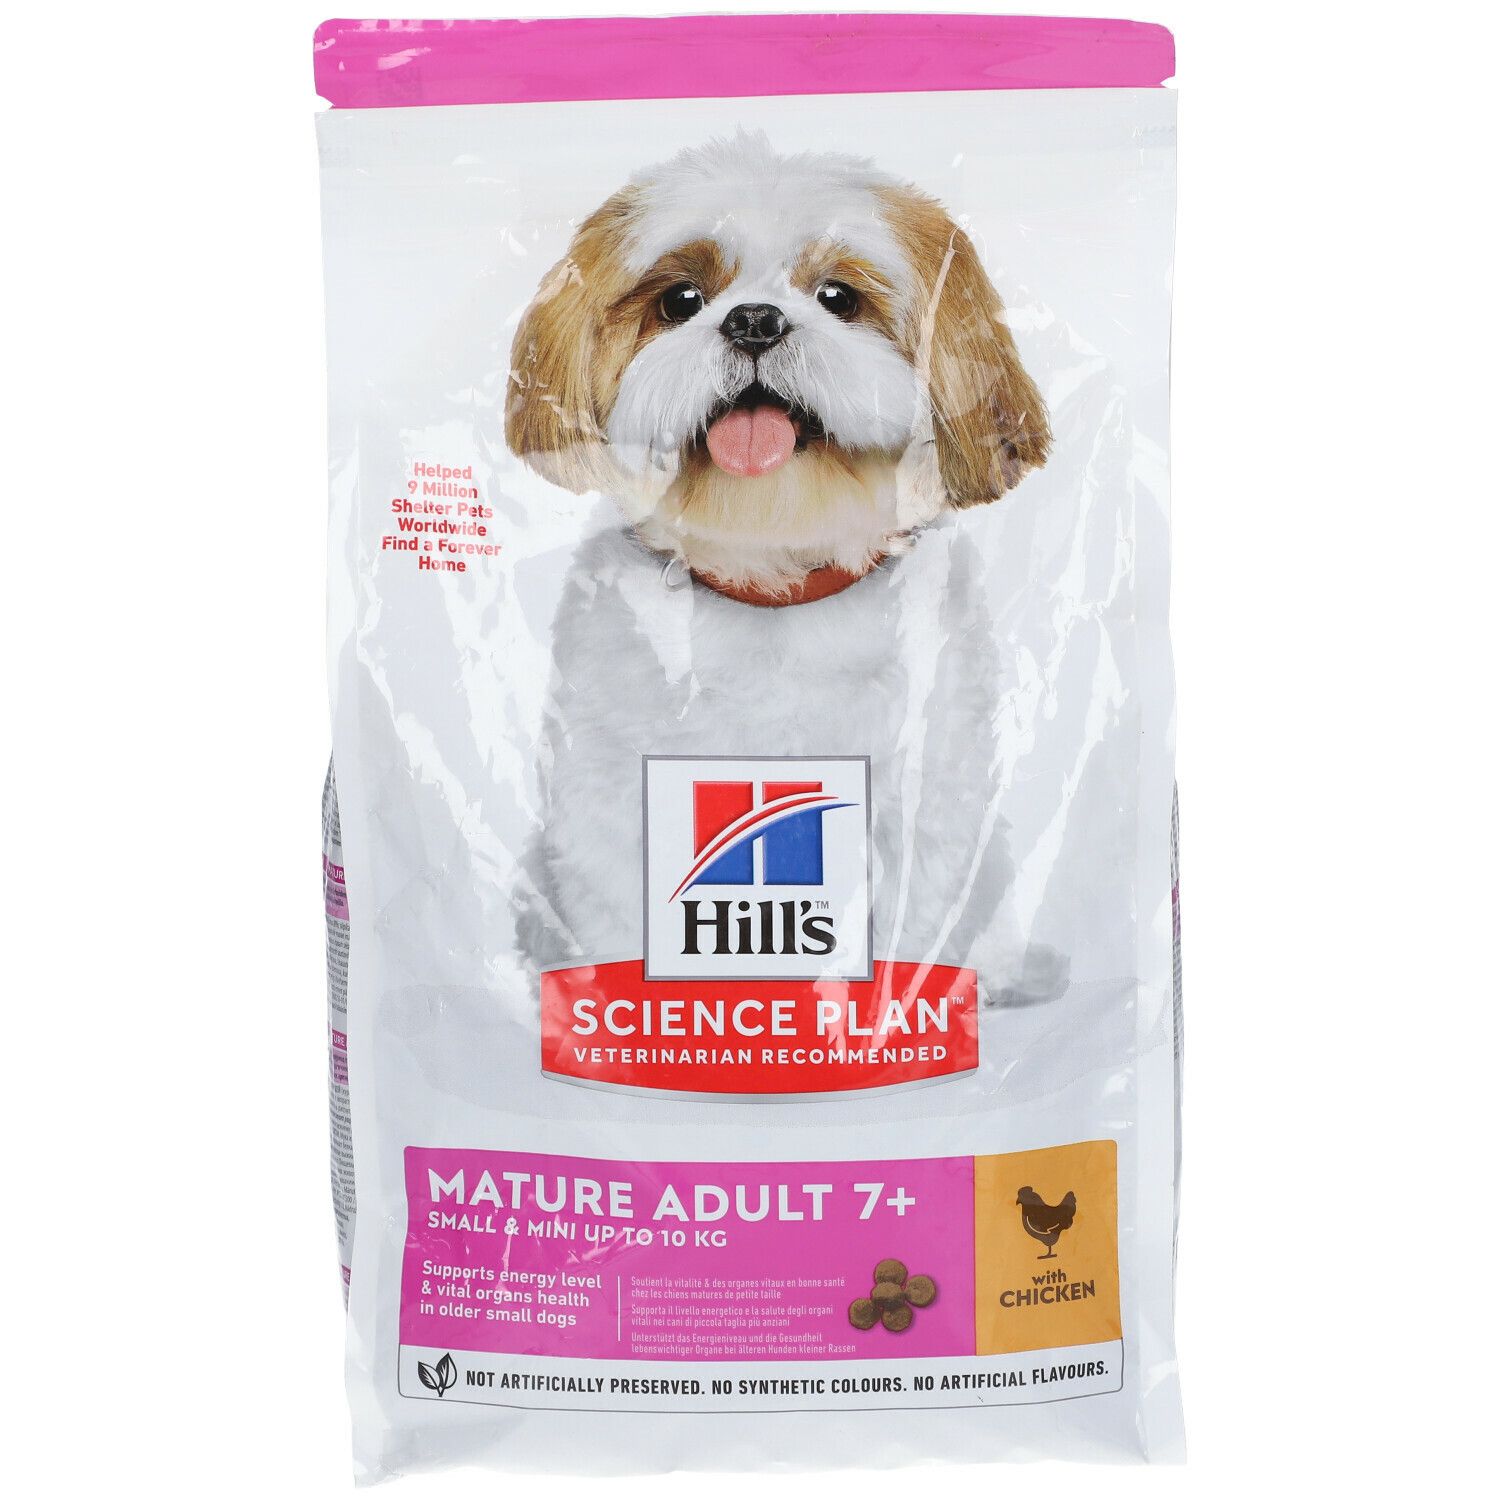 Hill's Science Plan Canine Mature Adult Small & Mini Dog